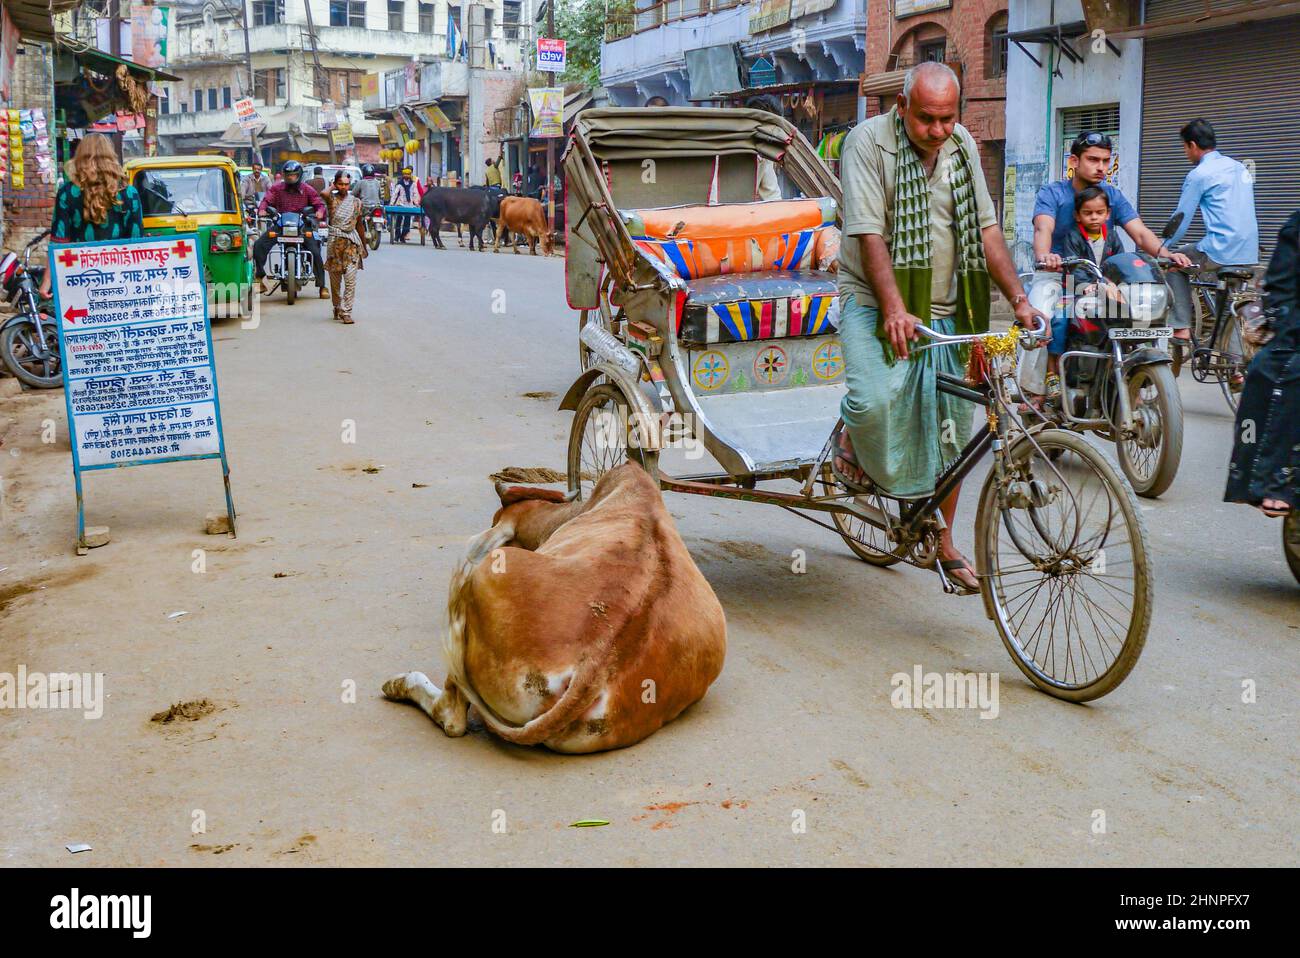 cow relaxes at the street and all people have to give way to the cow. Stock Photo